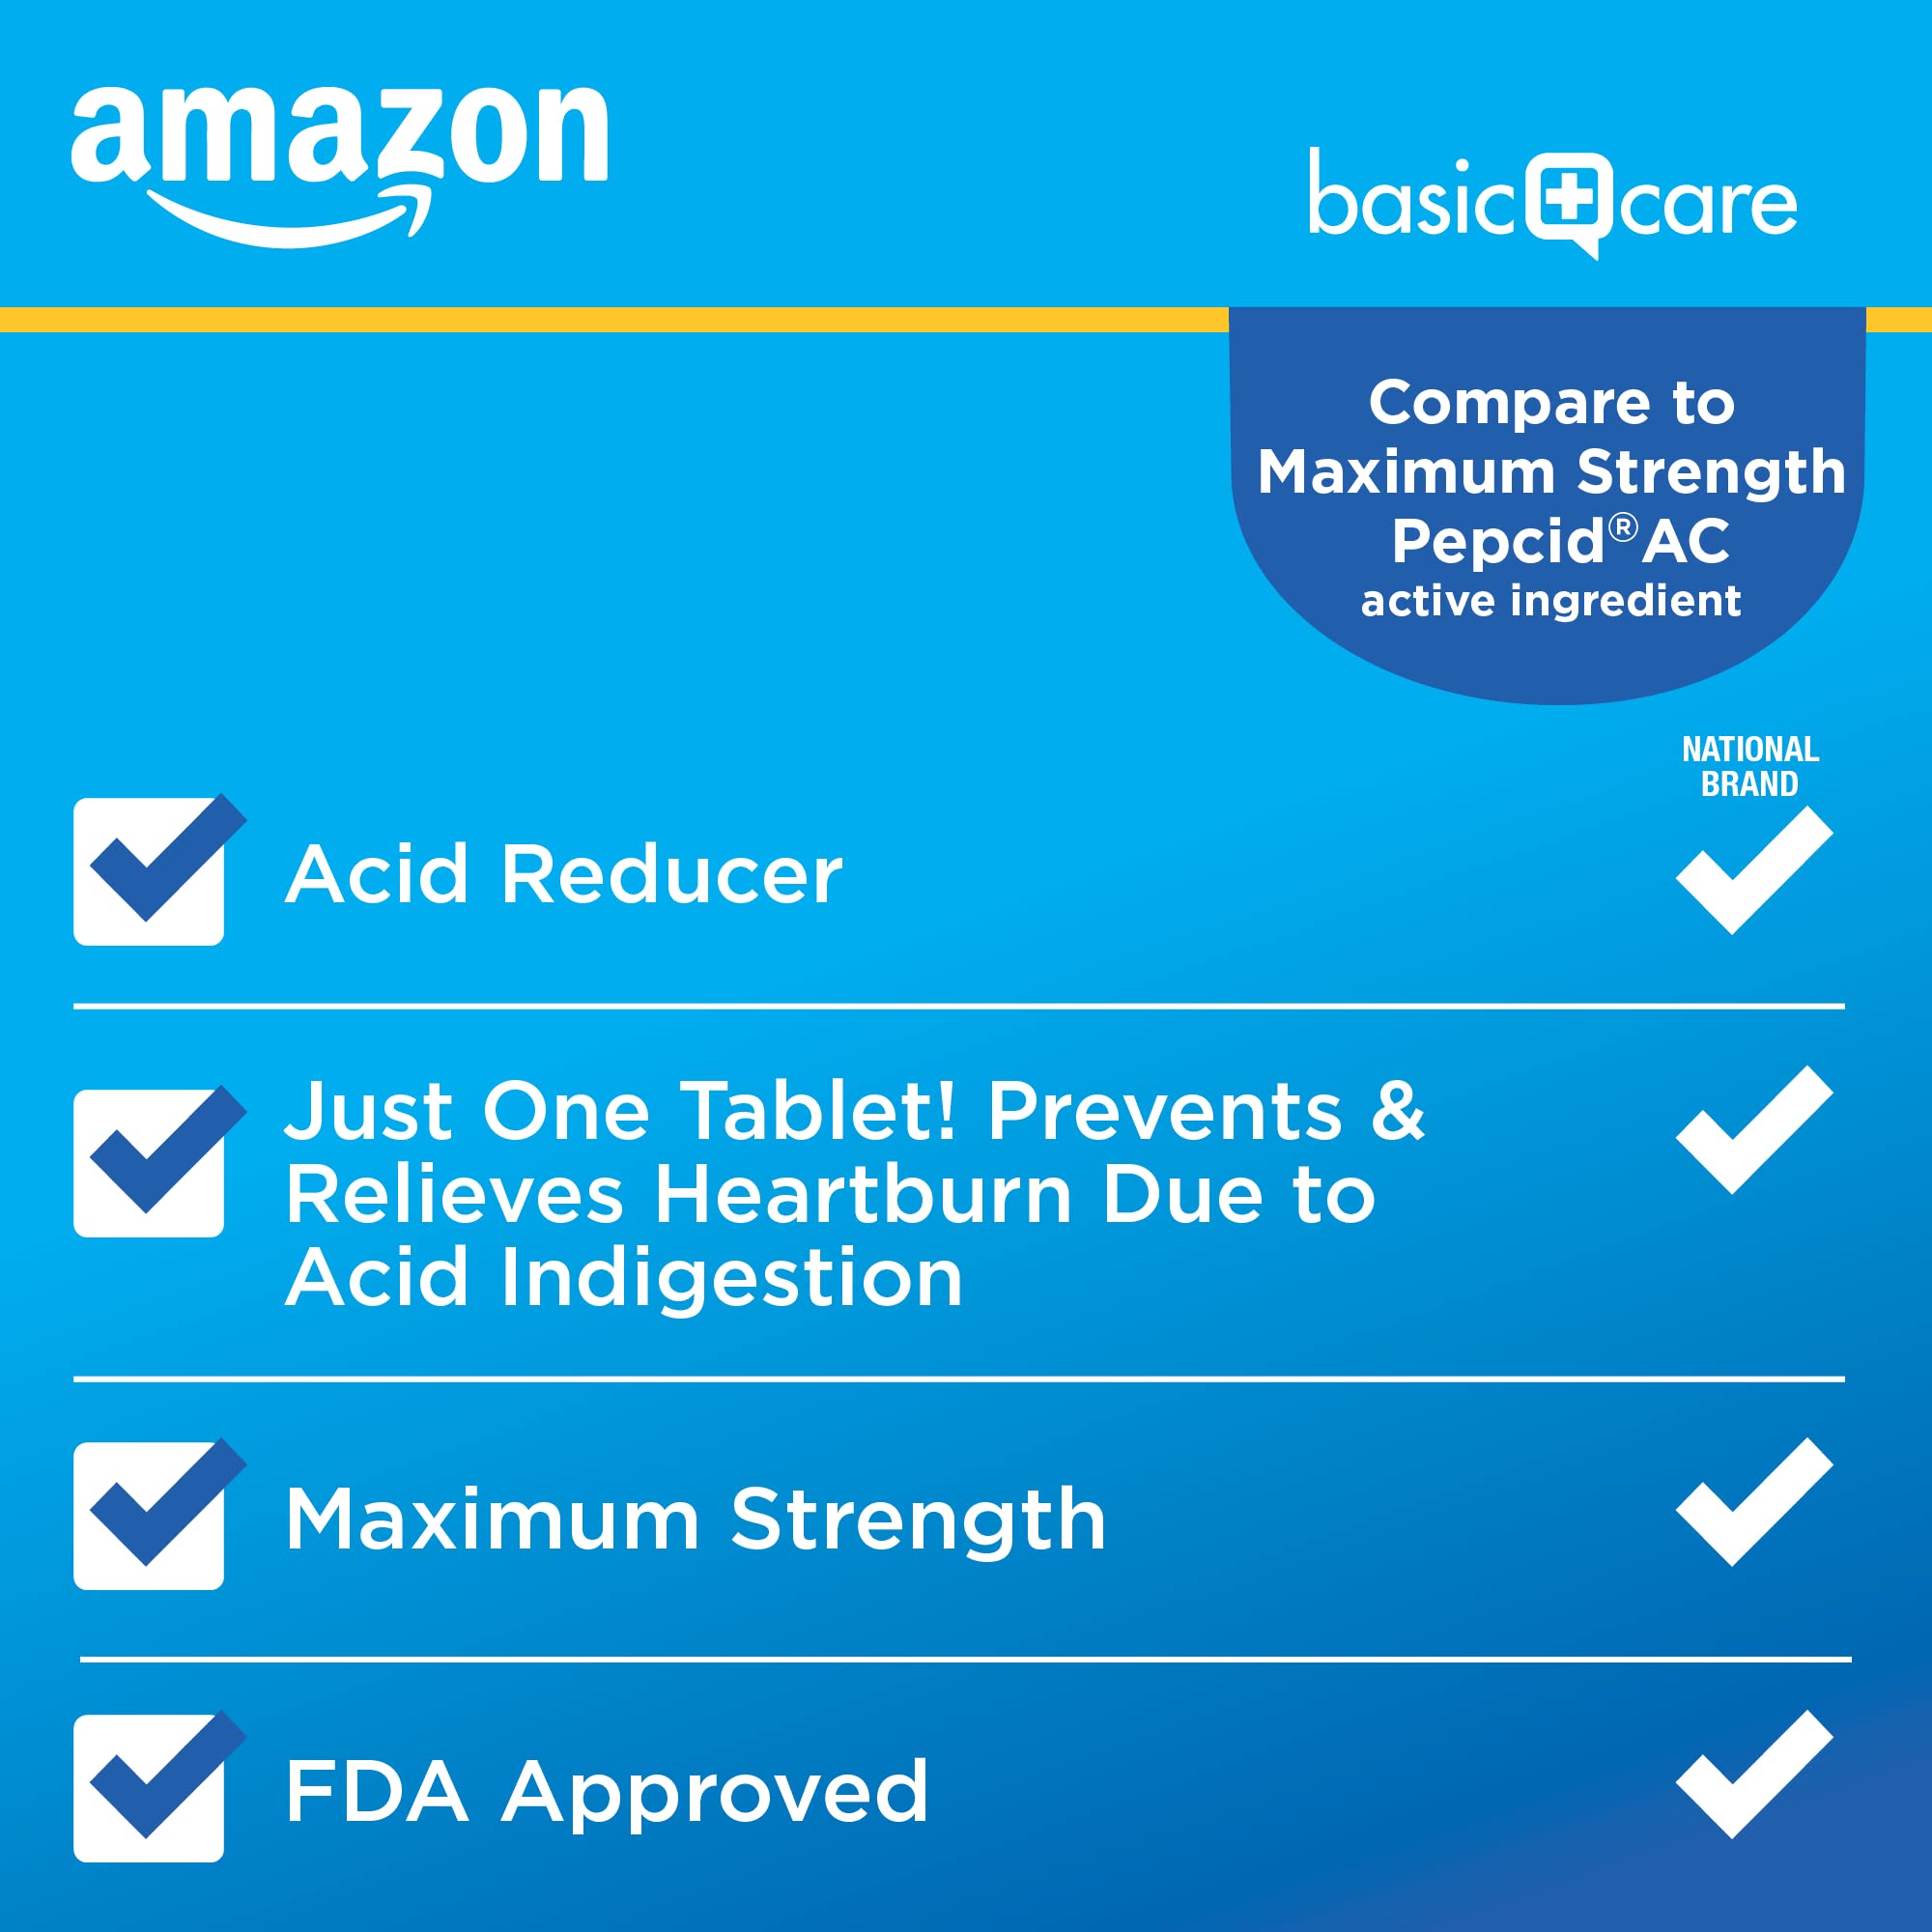 Amazon Basic Care Maximum Strength Famotidine Tablets 20 mg, Acid Reducer Pills for Heartburn Relief, 200 Count